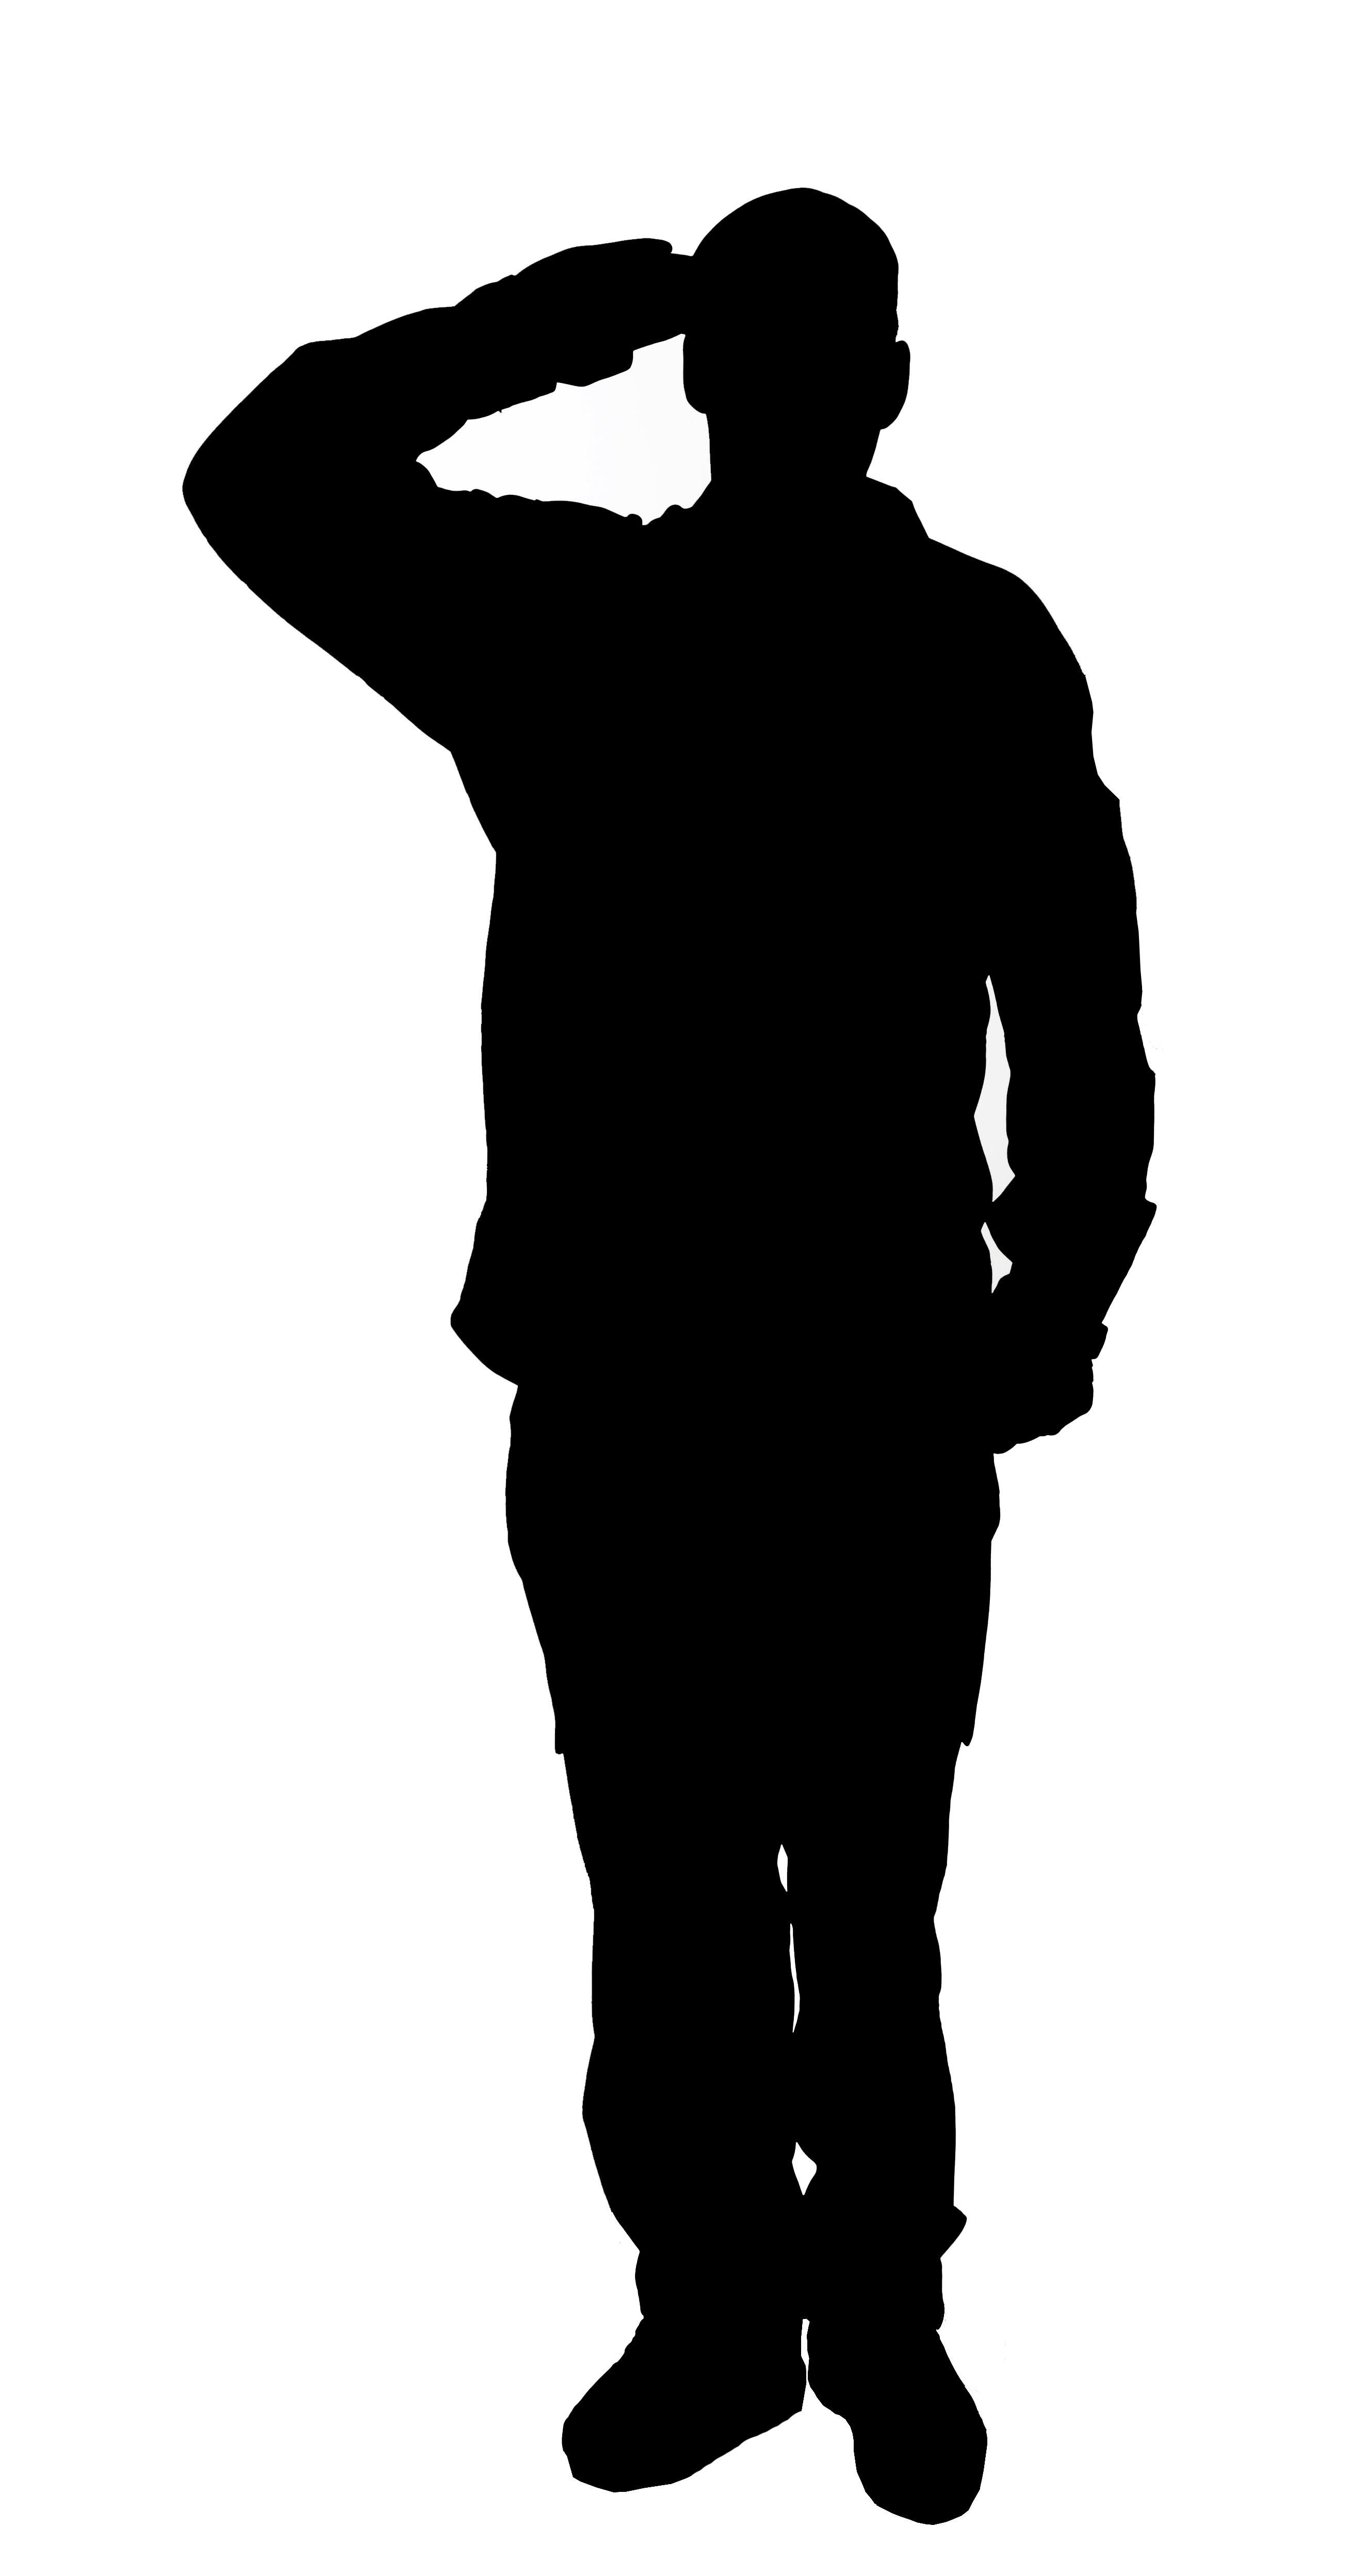 Soldier Silhouette - Clipart library